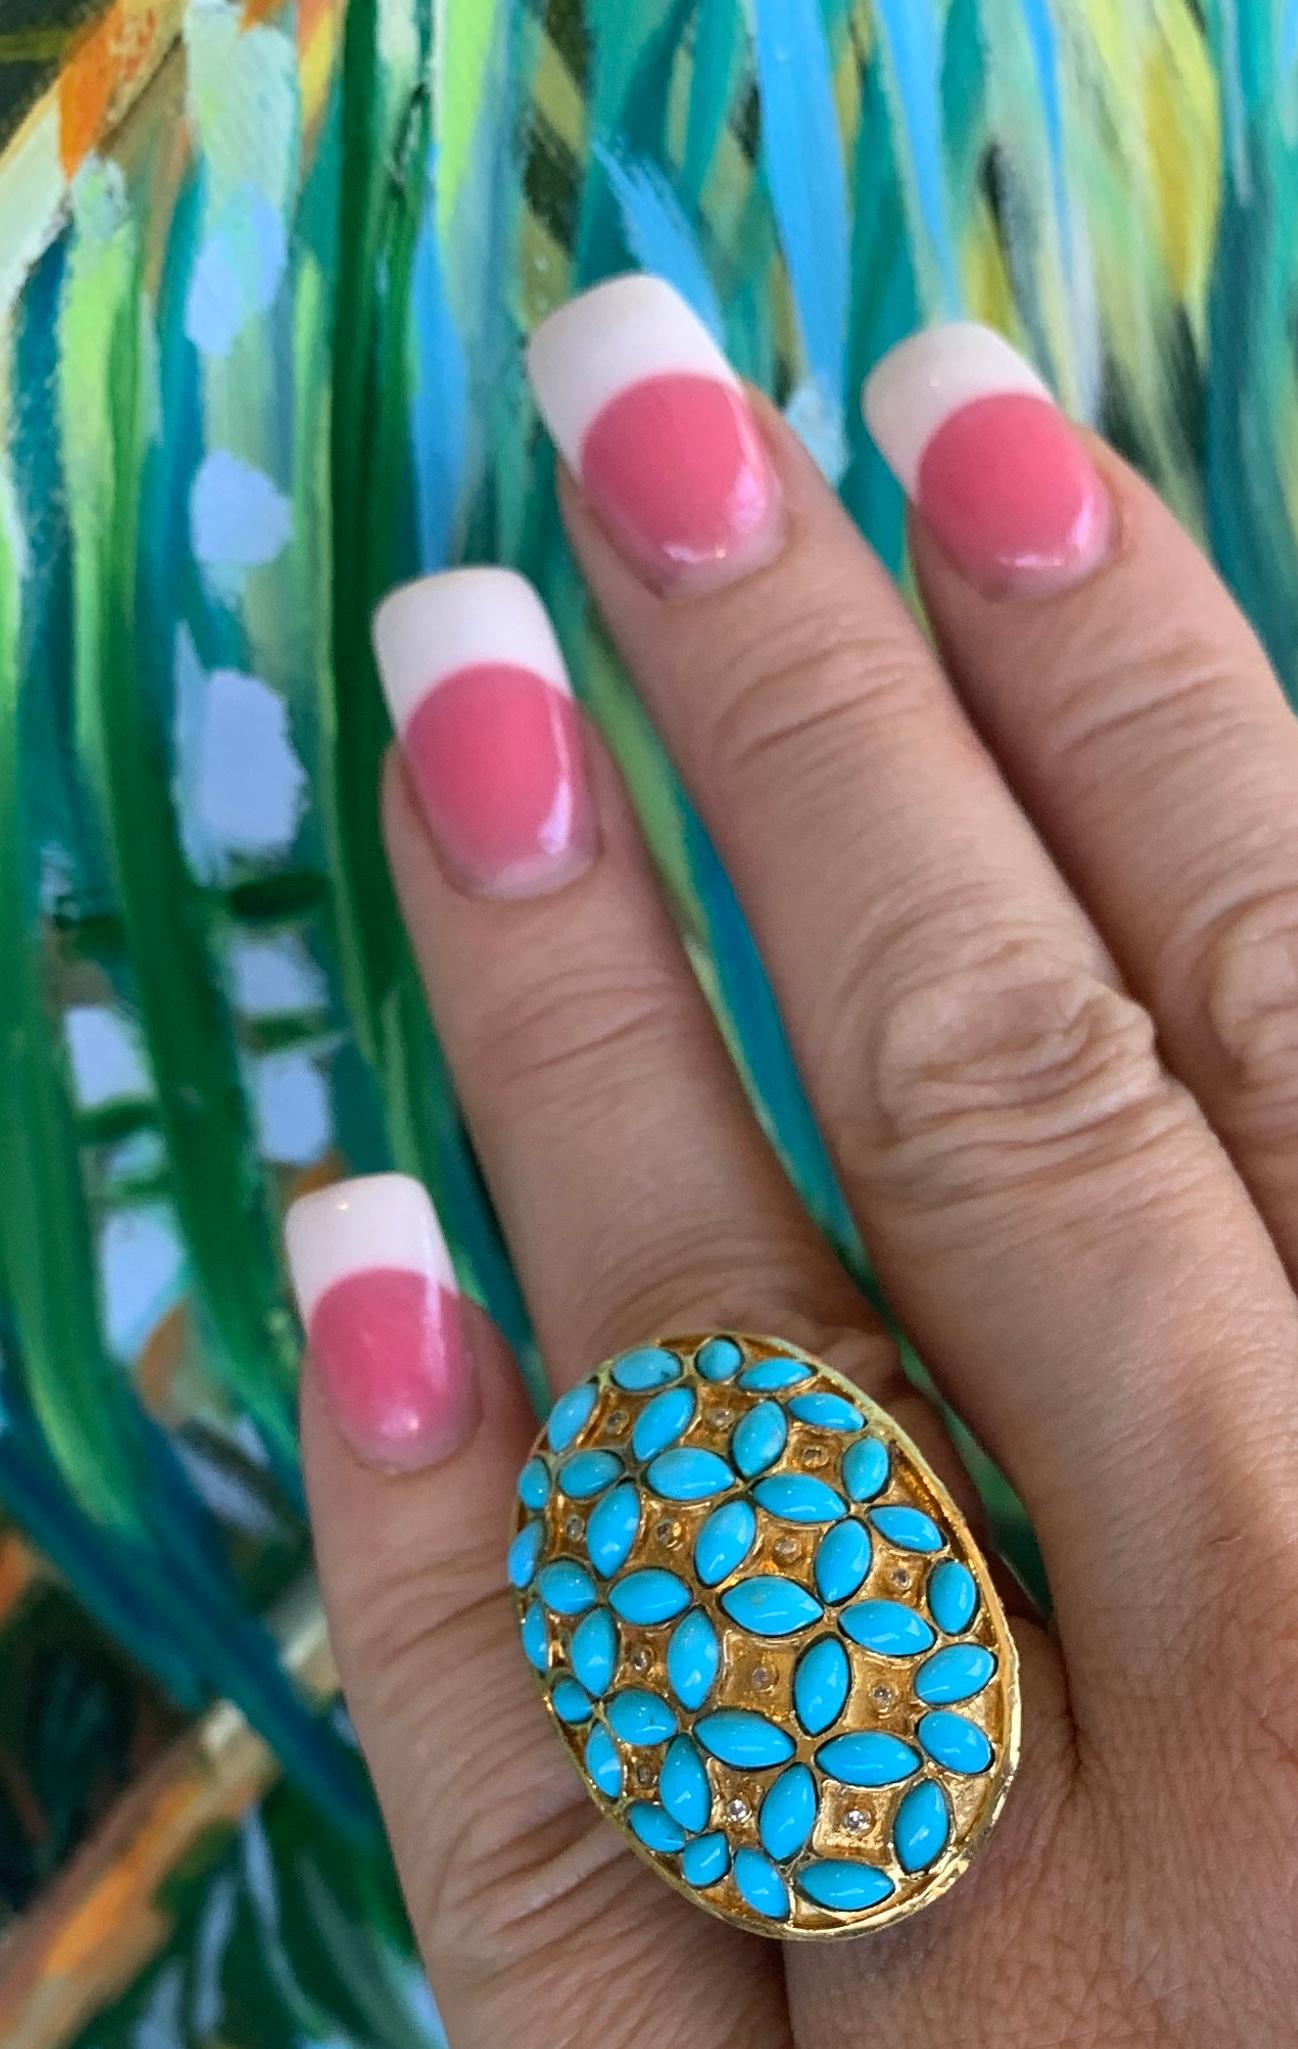 Magnificently large oval dome shaped 18 karat yellow gold cocktail ring from the 1970s features huge finger coverage.  39 tapered cabochon shaped, pure robin's egg blue Persian turquoise stones are accented by 14 round white diamonds bezel set in a